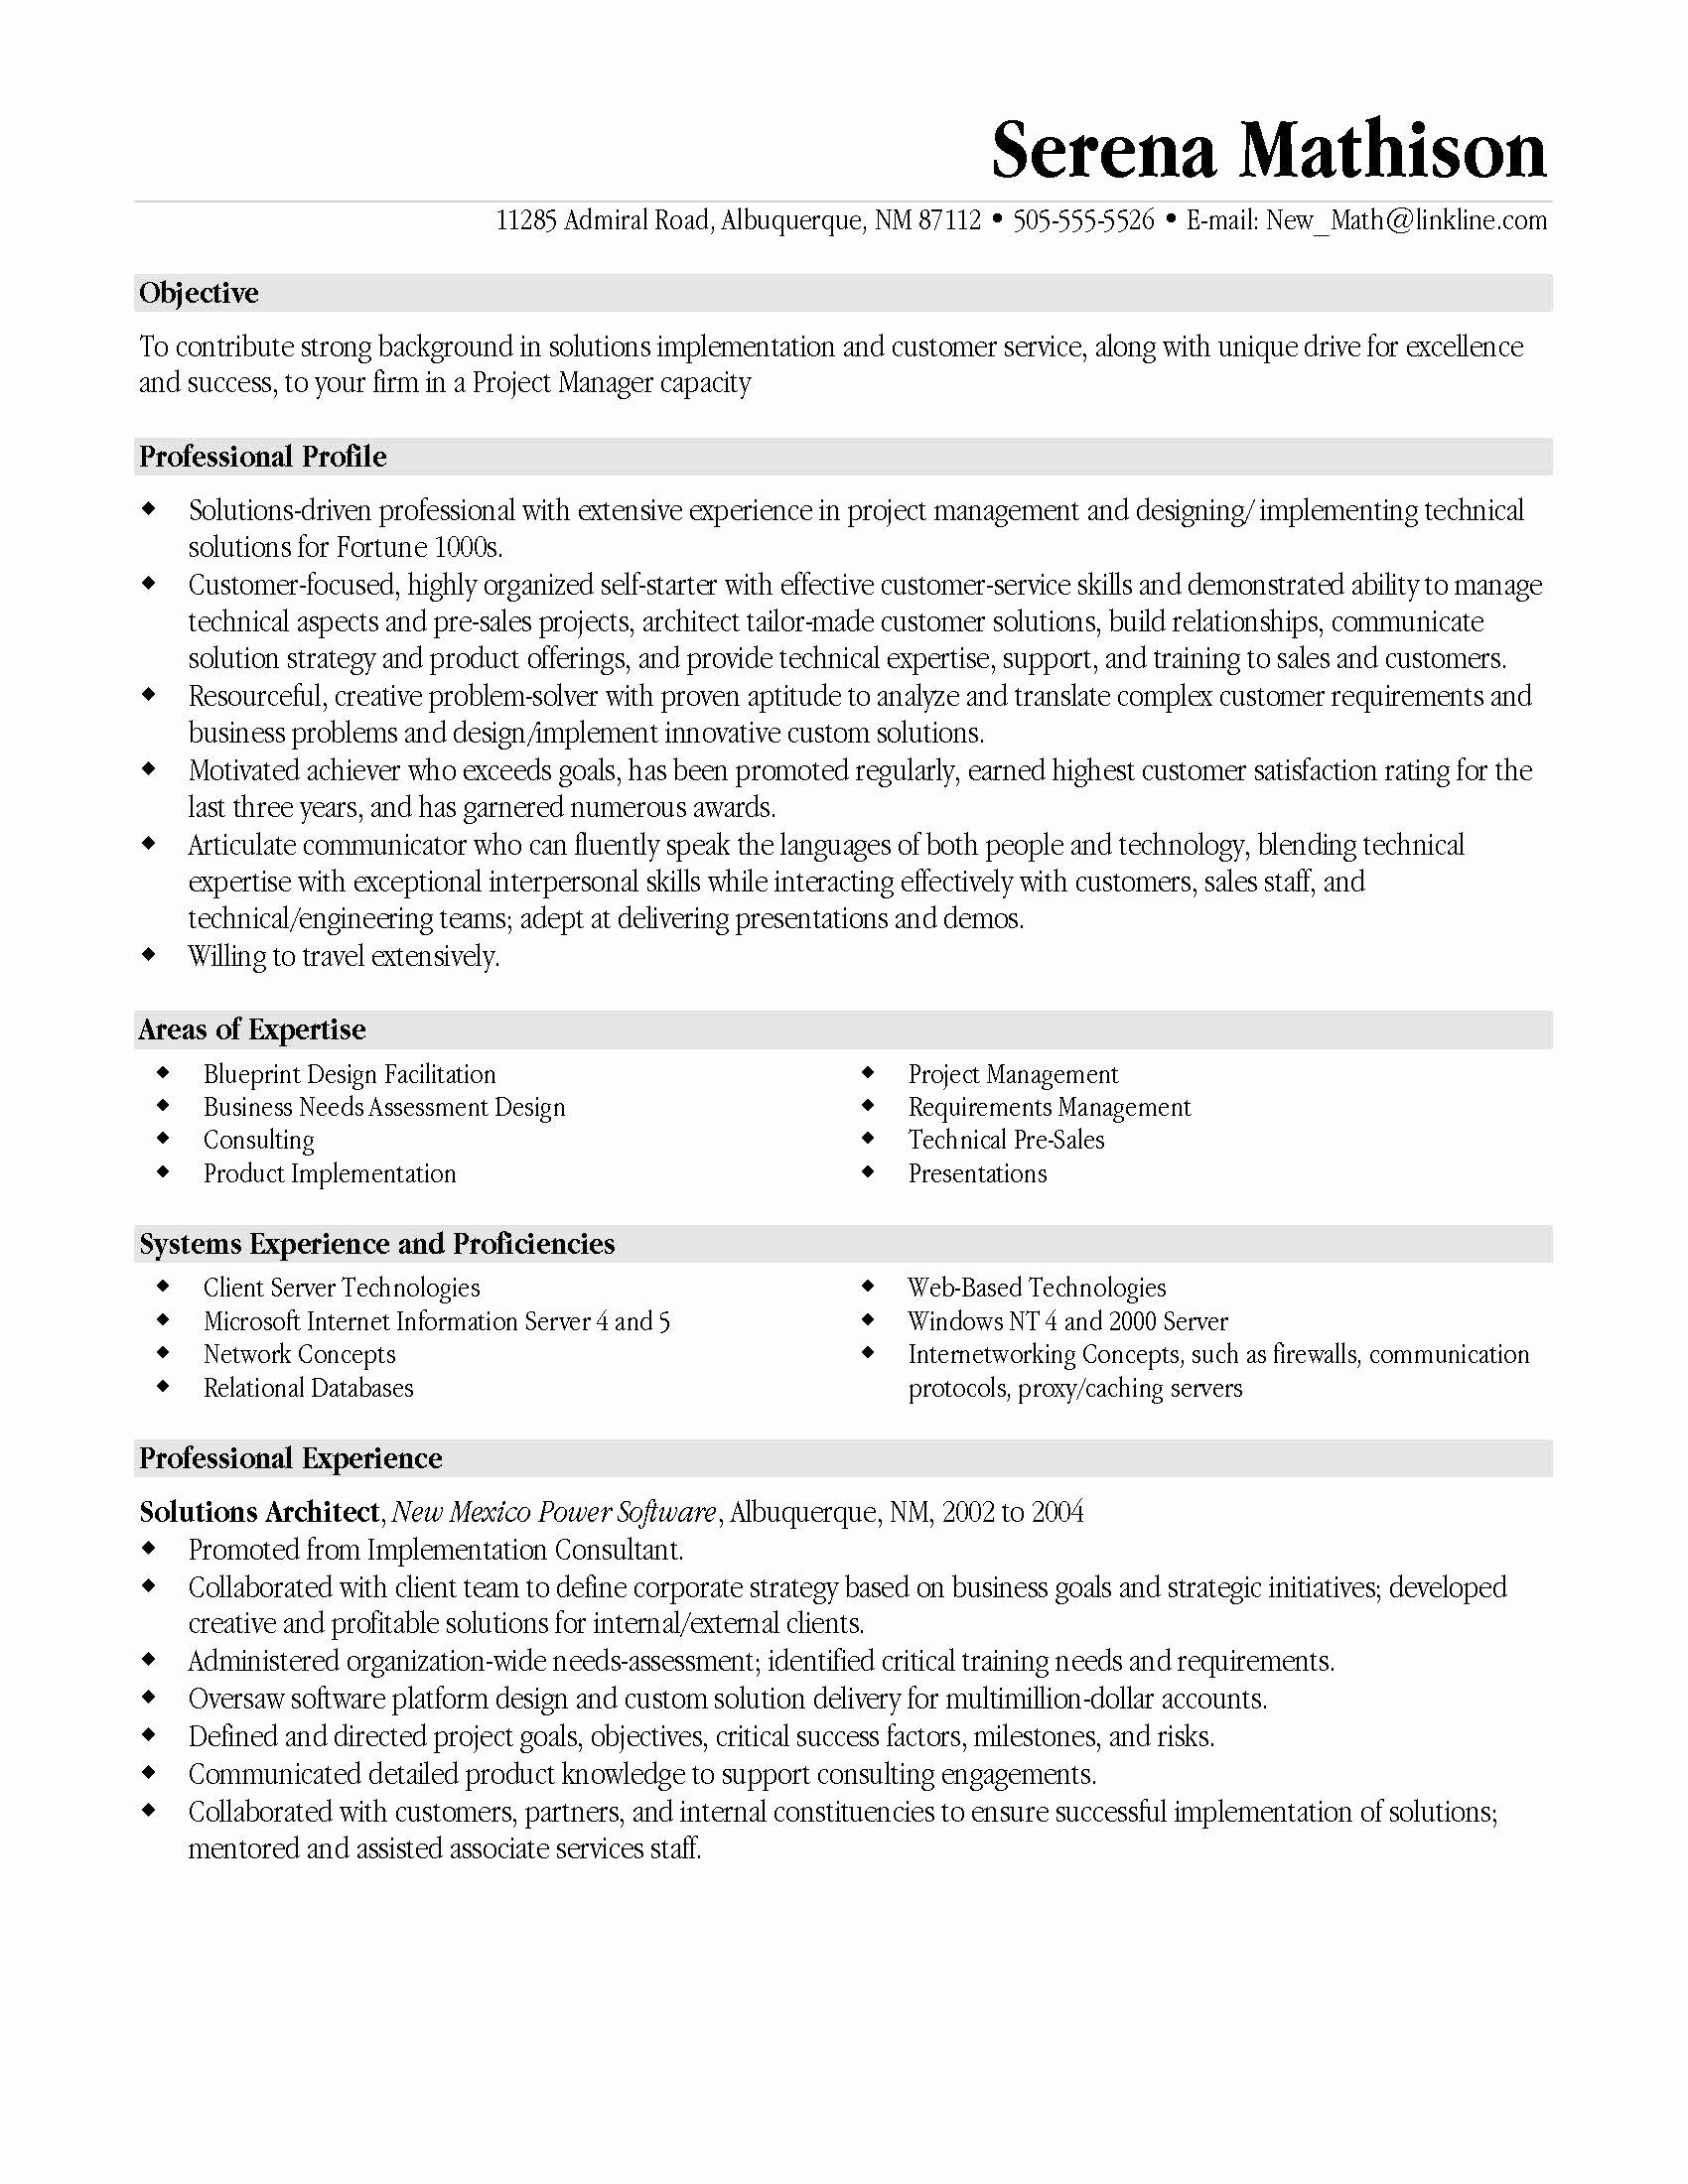 Resumes and Cover Letters the Ohio State University